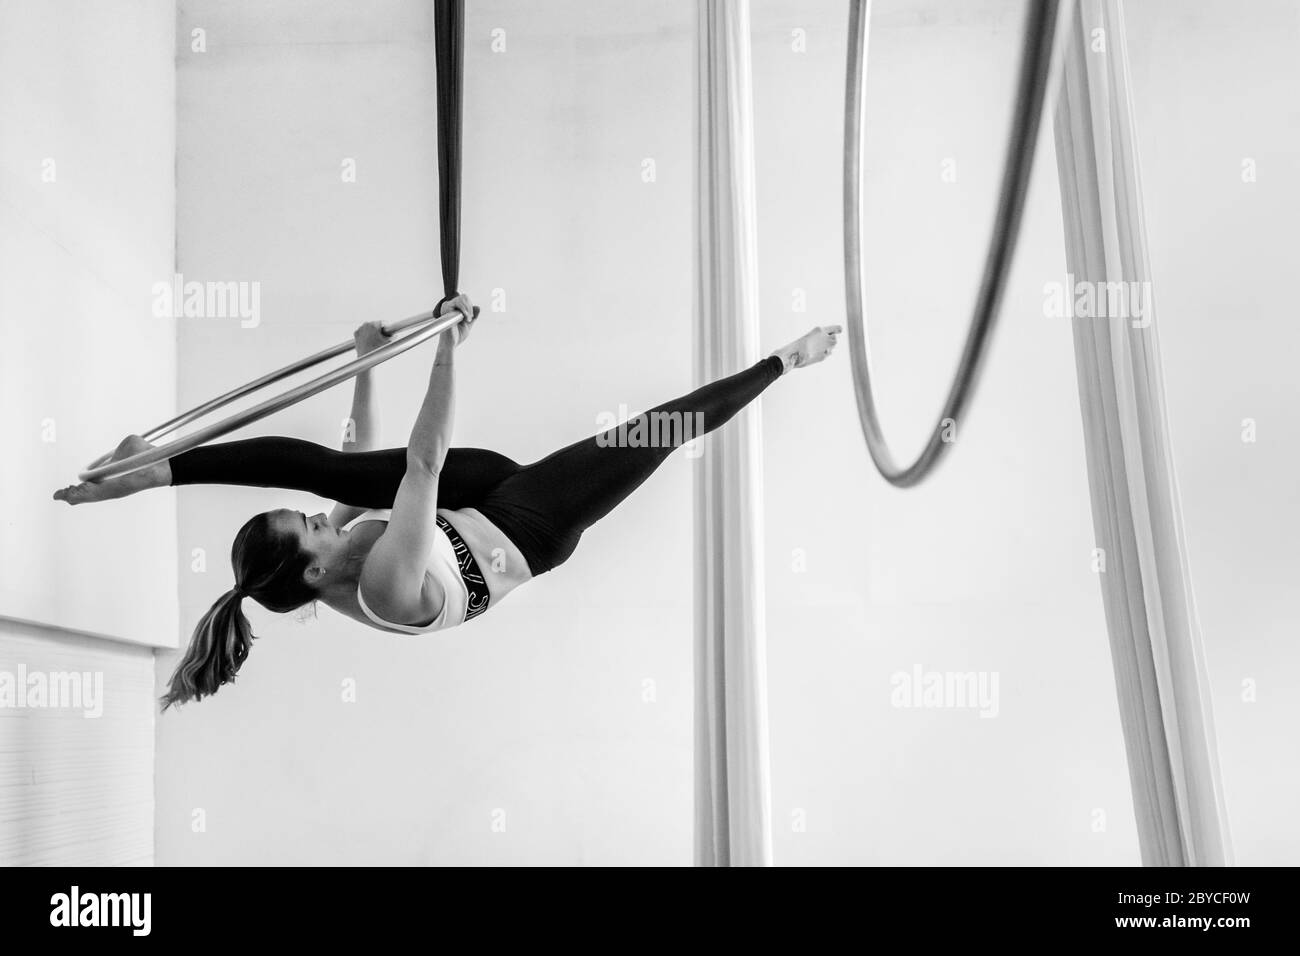 A Colombian Aerial Dancer Performs On Aerial Hoop During A Training Session In A Gym In Medellín